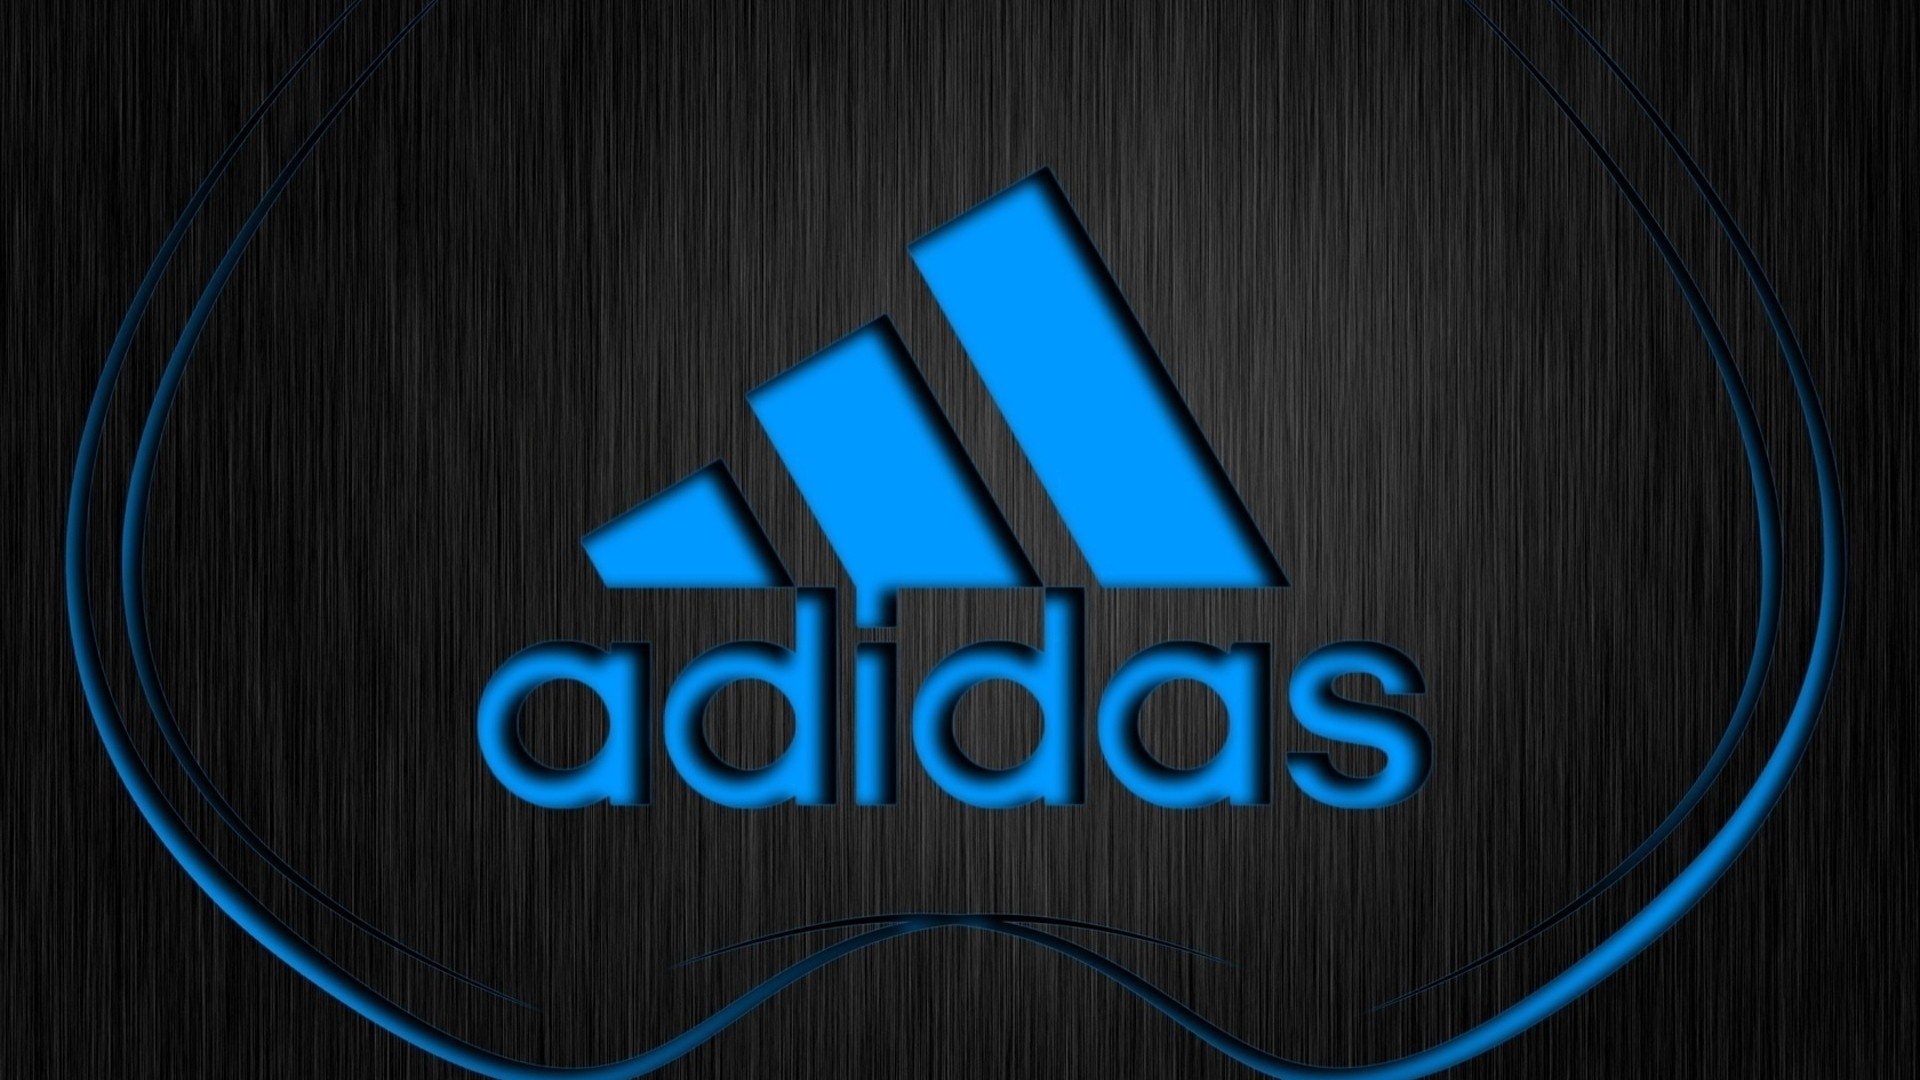 29 Adidas HD Wallpapers Backgrounds Wallpaper Abyss